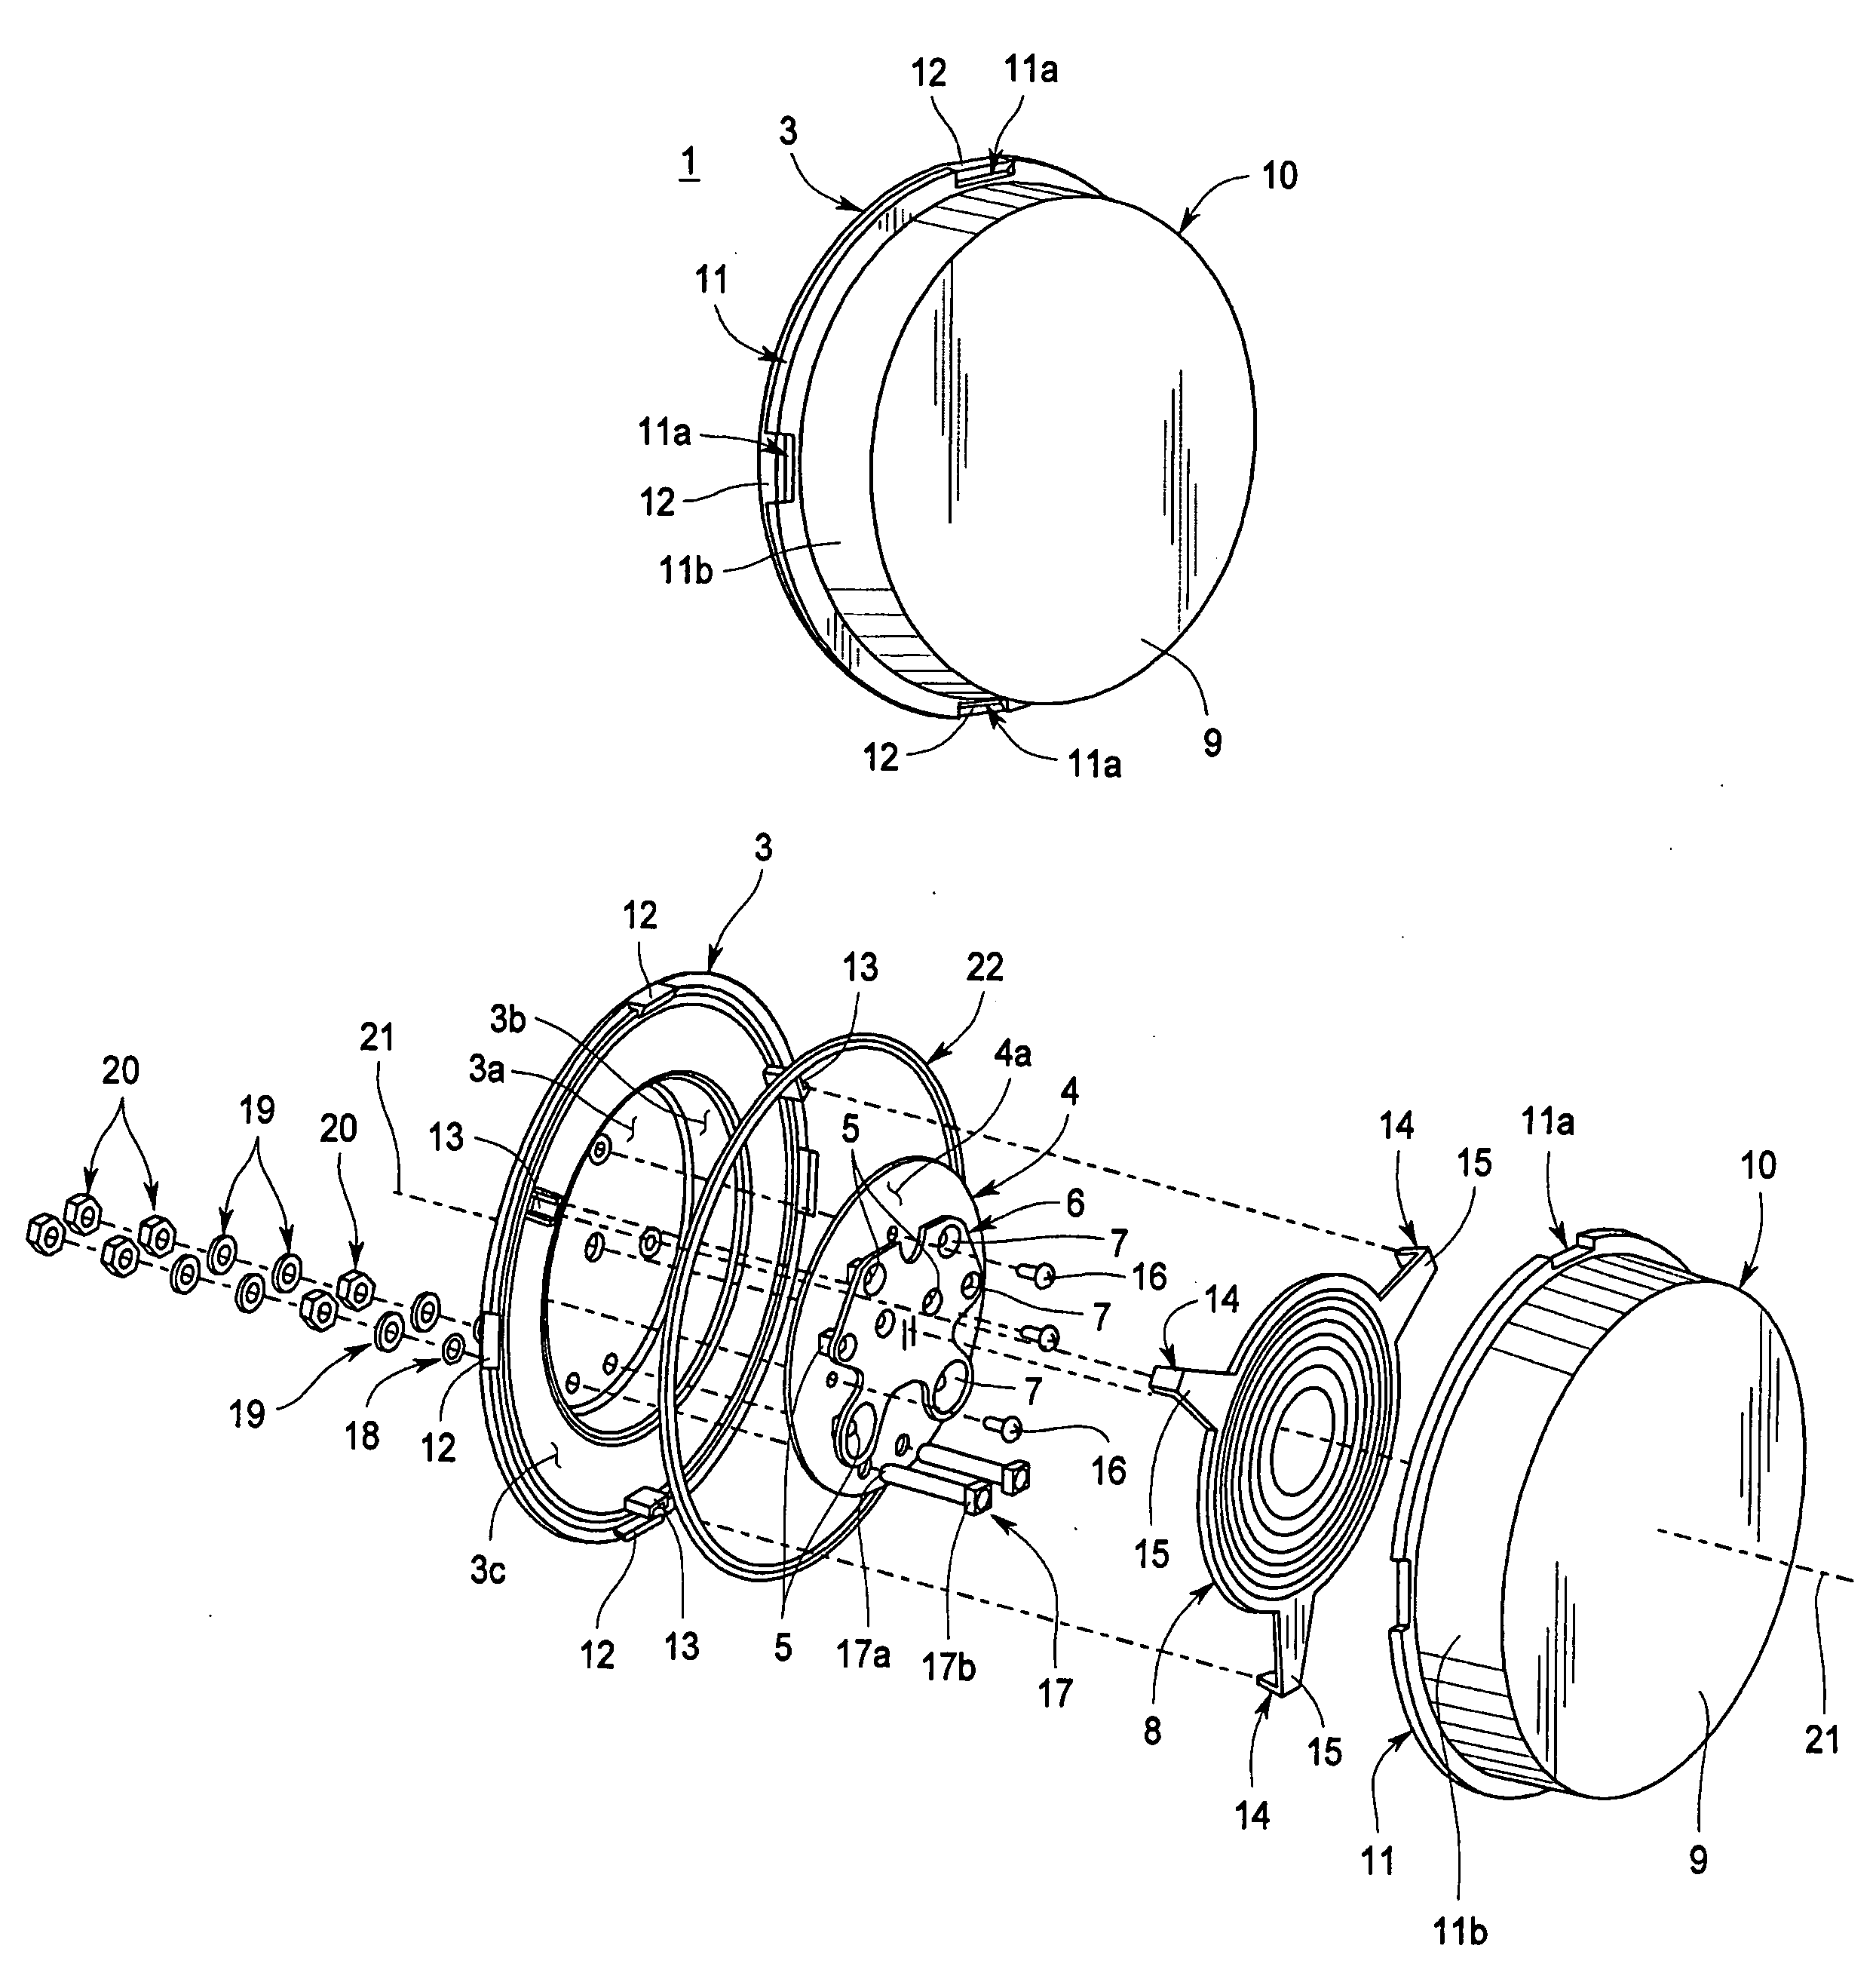 Light emitting diode signaling device and method of providing an indication using the same